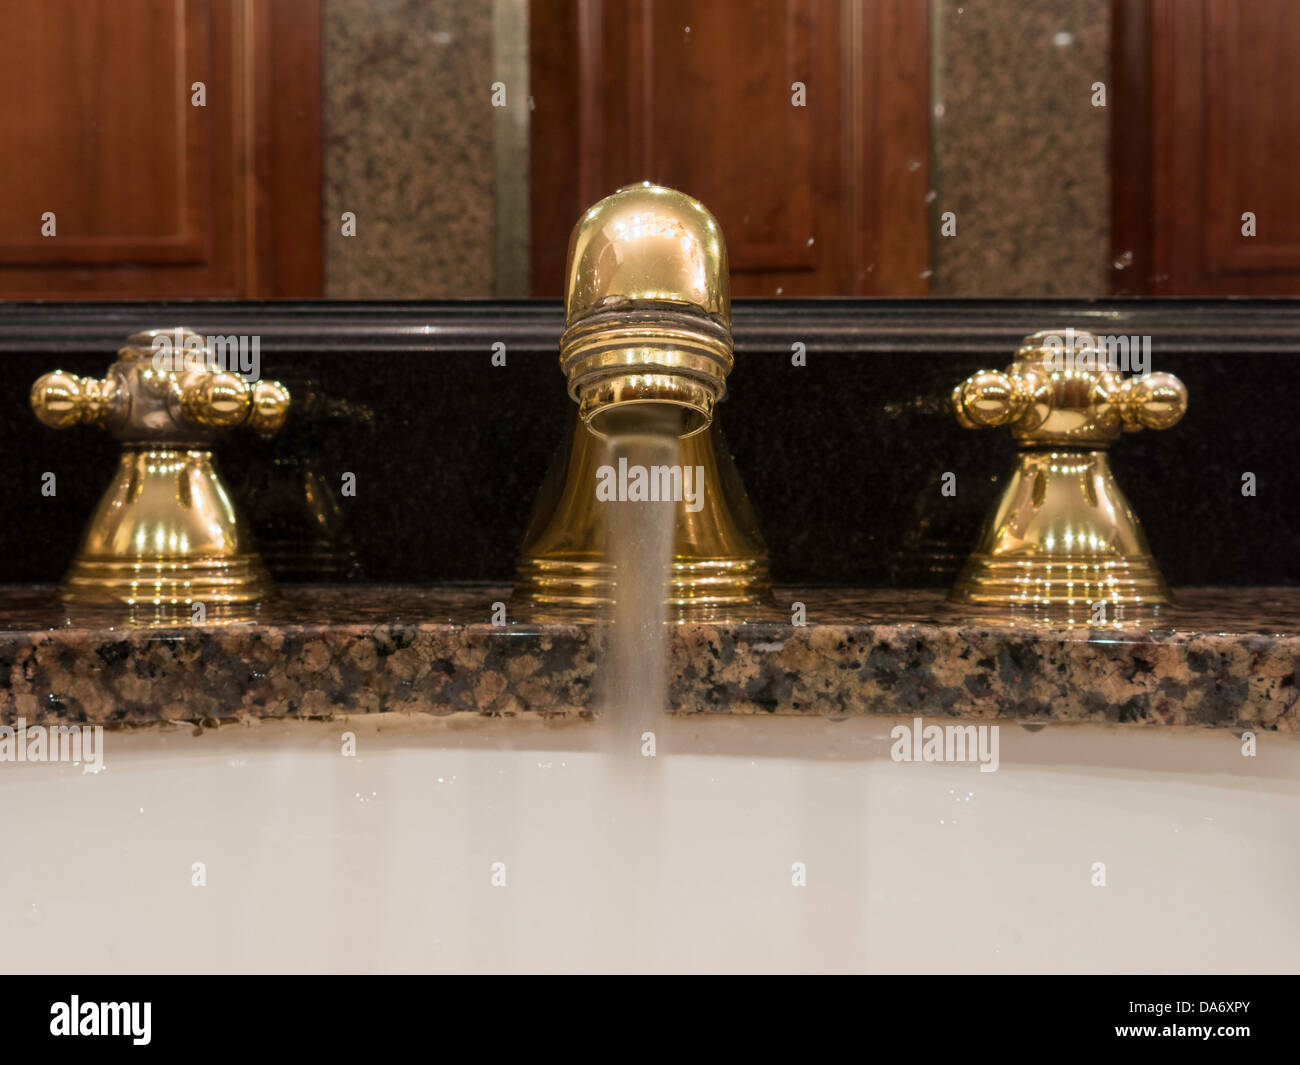 Bathroom Sink Faucet with Running Water Stock Photo